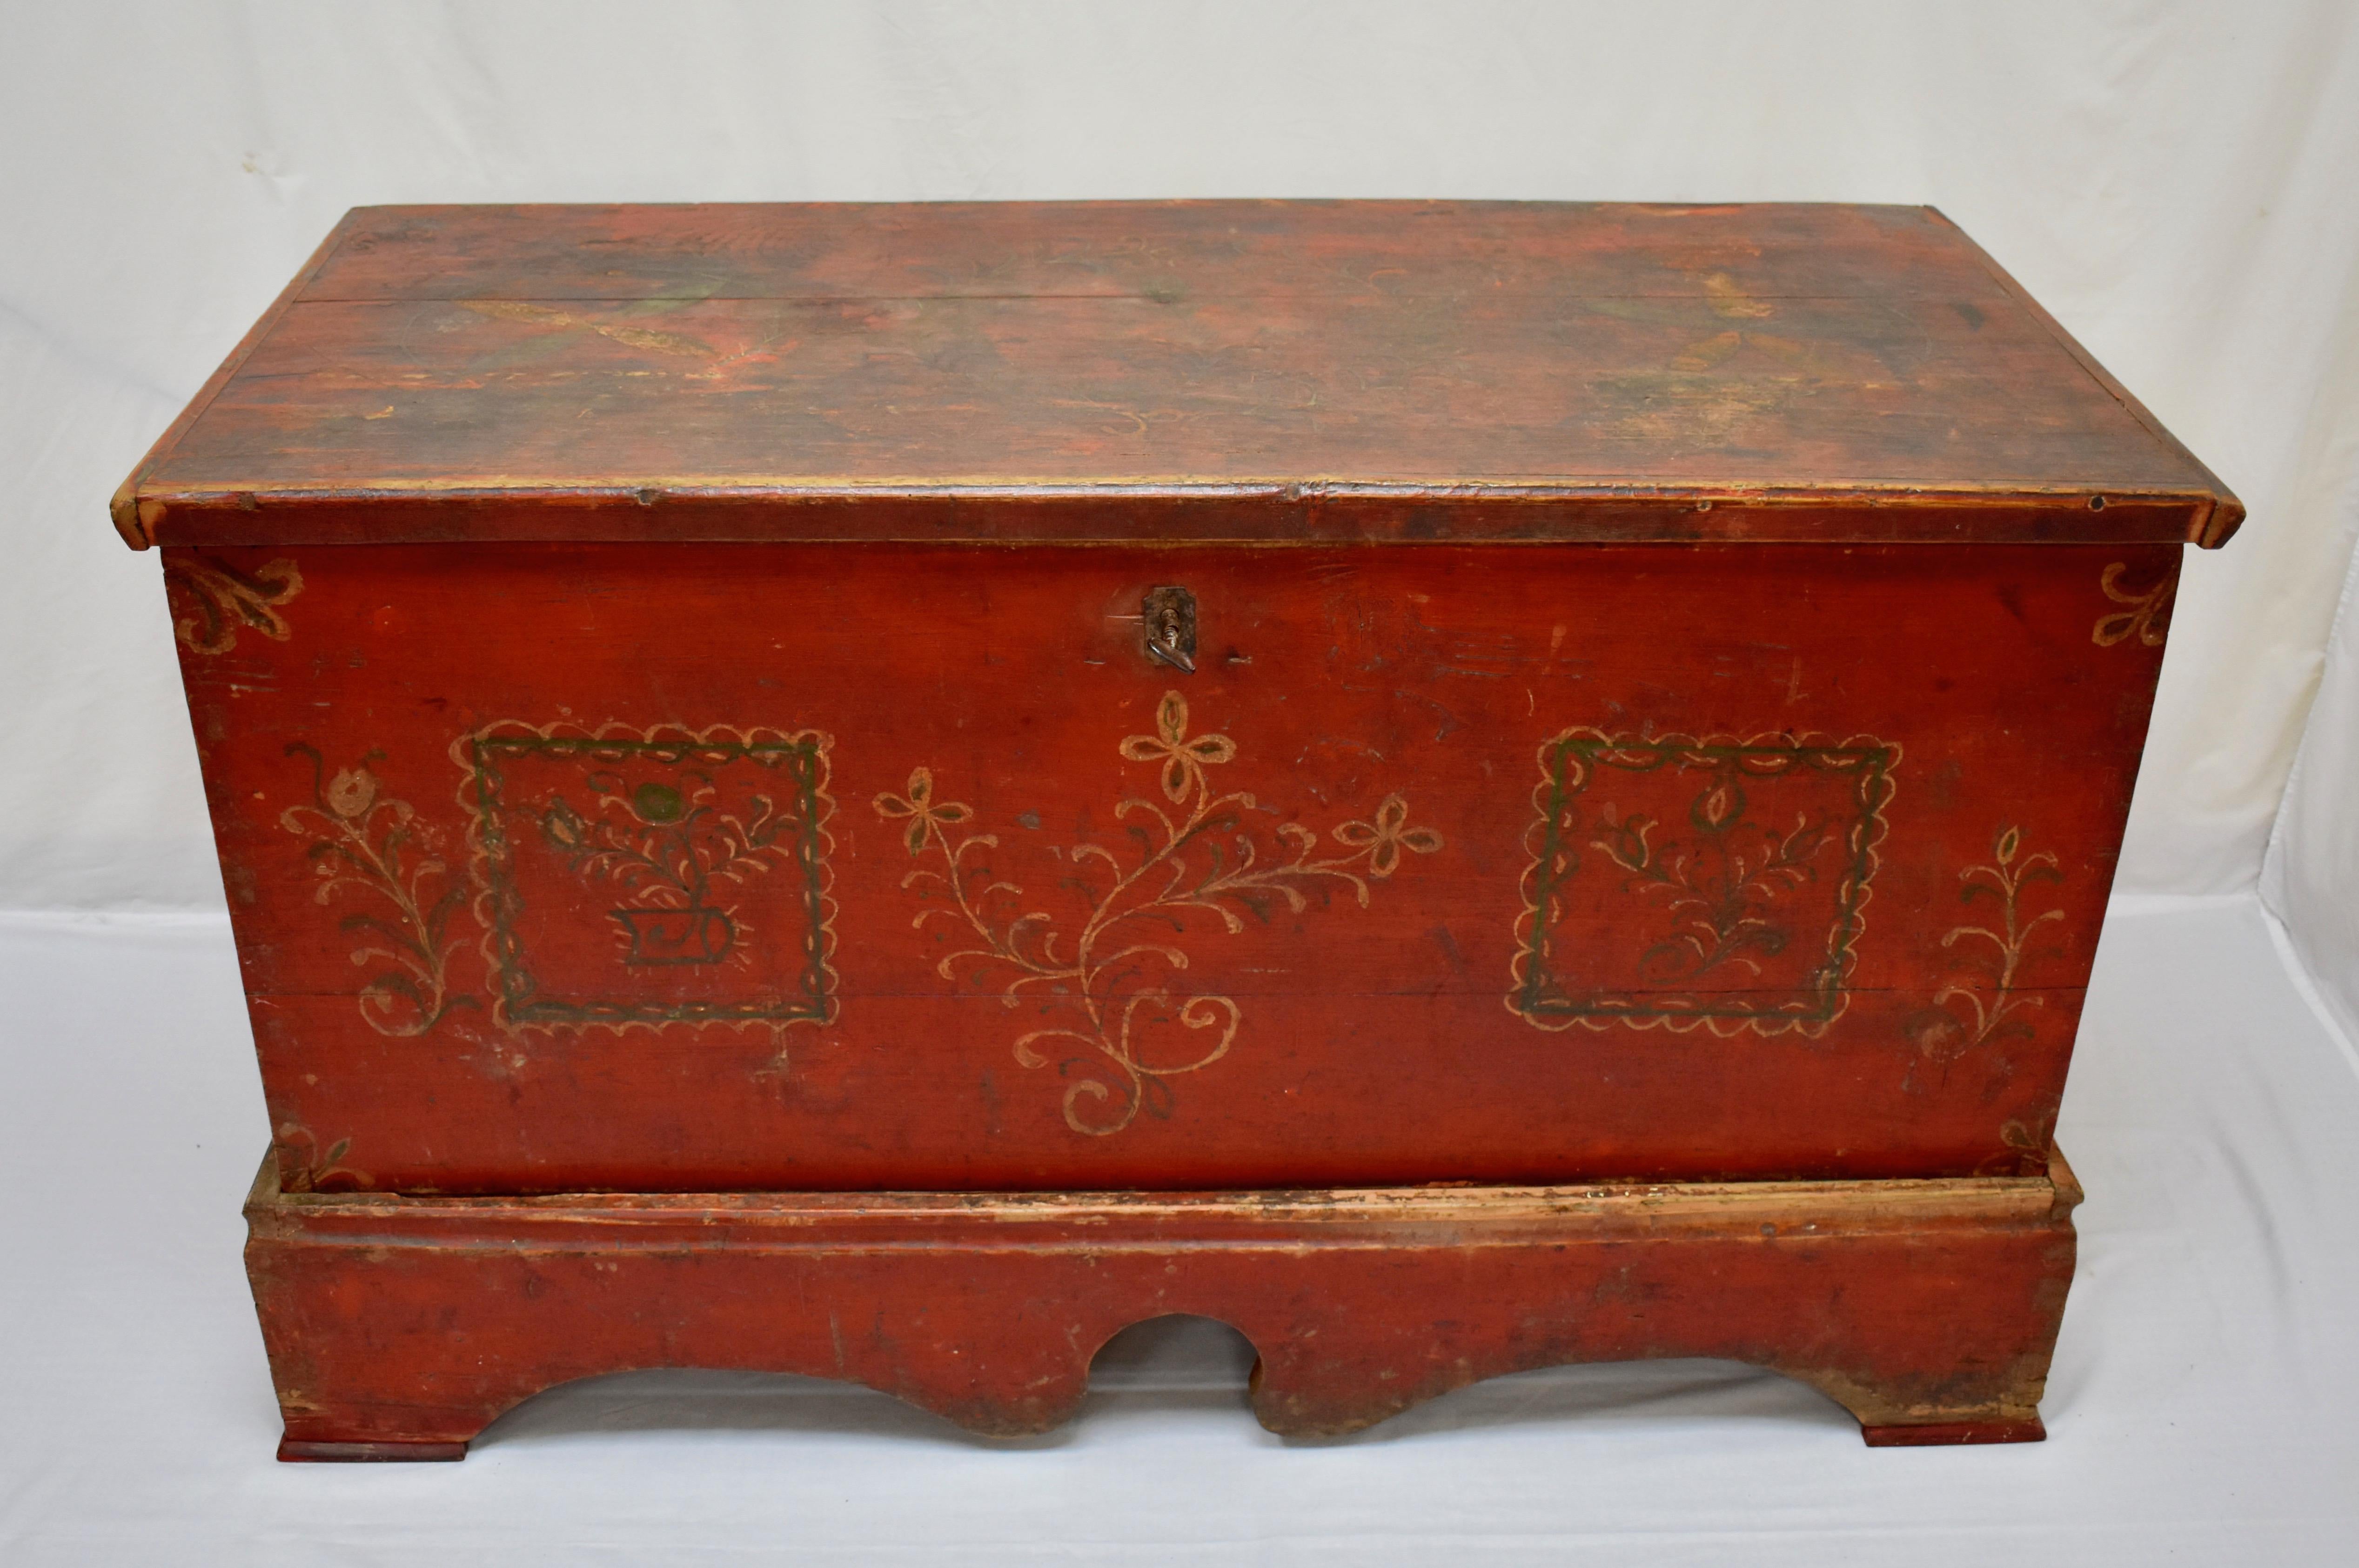 This is a very large and handsome mid-19th century trunk or blanket chest of considerable presence, probably created as a gift for a bride, to be used as a repository for all the important linens of the new household. A hand-cut dovetailed box sits